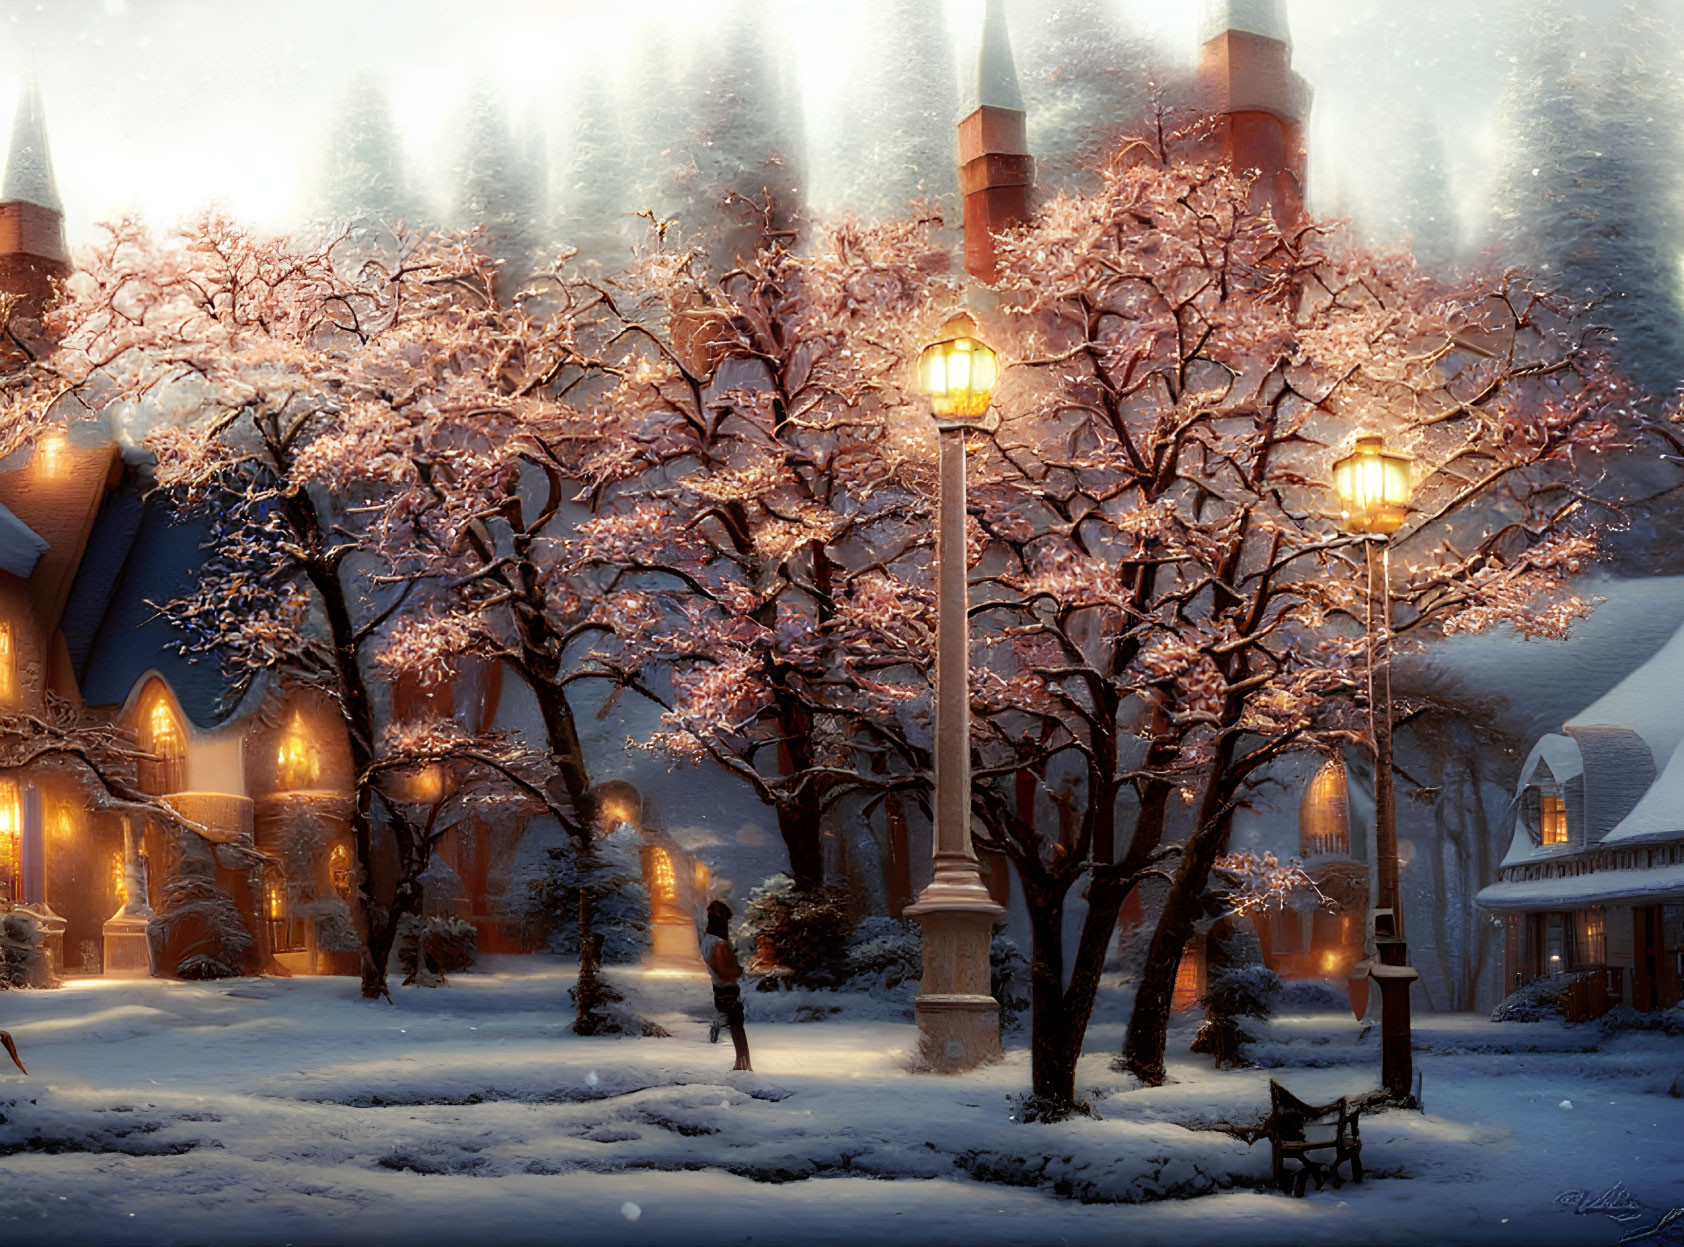 Snowy Evening Scene with Street Lamps, Cherry Blossom Trees, Bench, and Lit Building